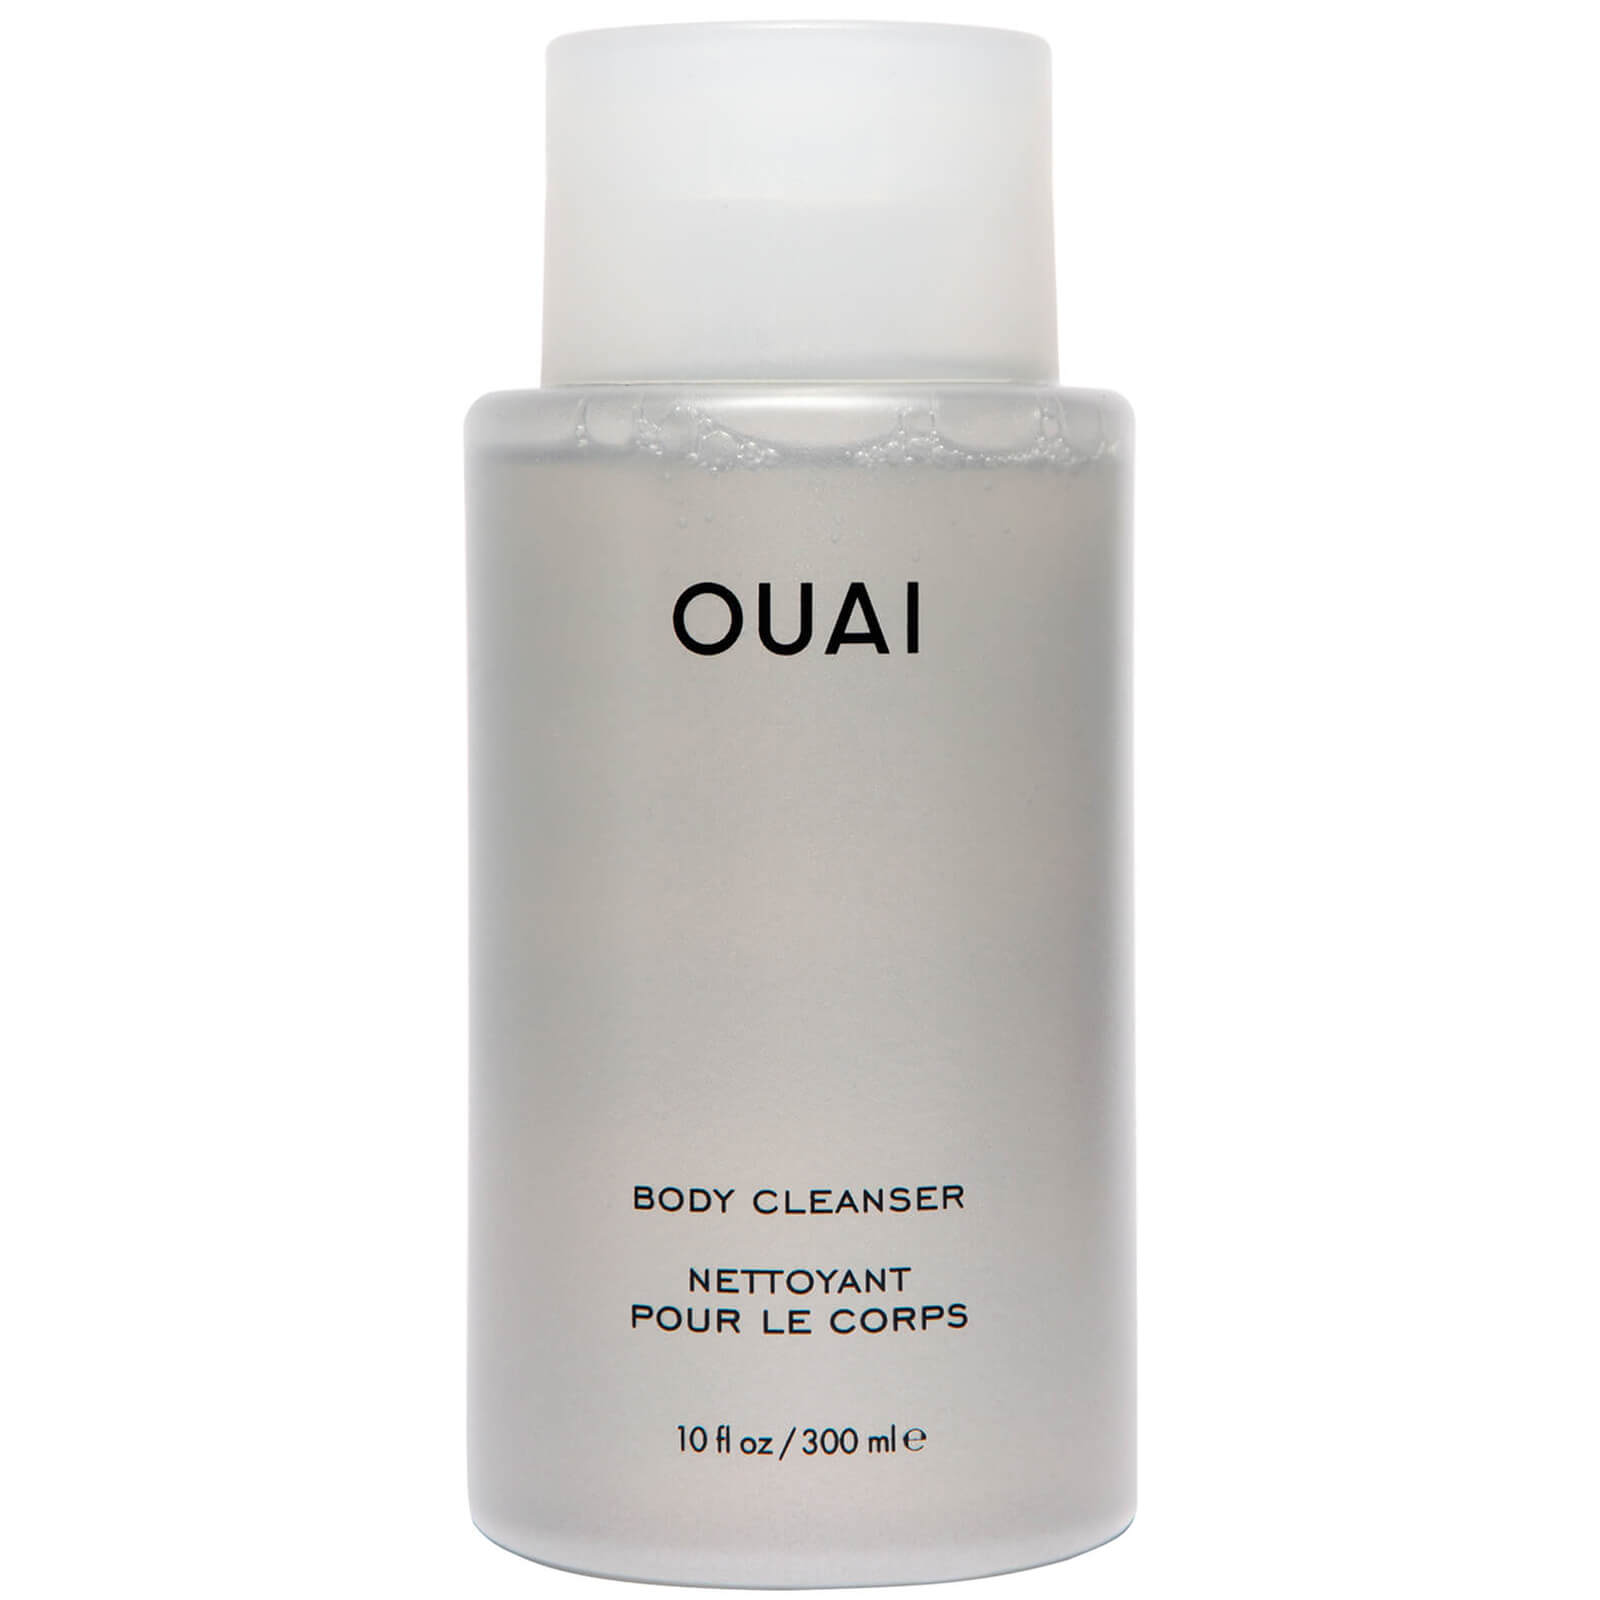 Photos - Facial / Body Cleansing Product OUAI Body Cleanser 300ml 750